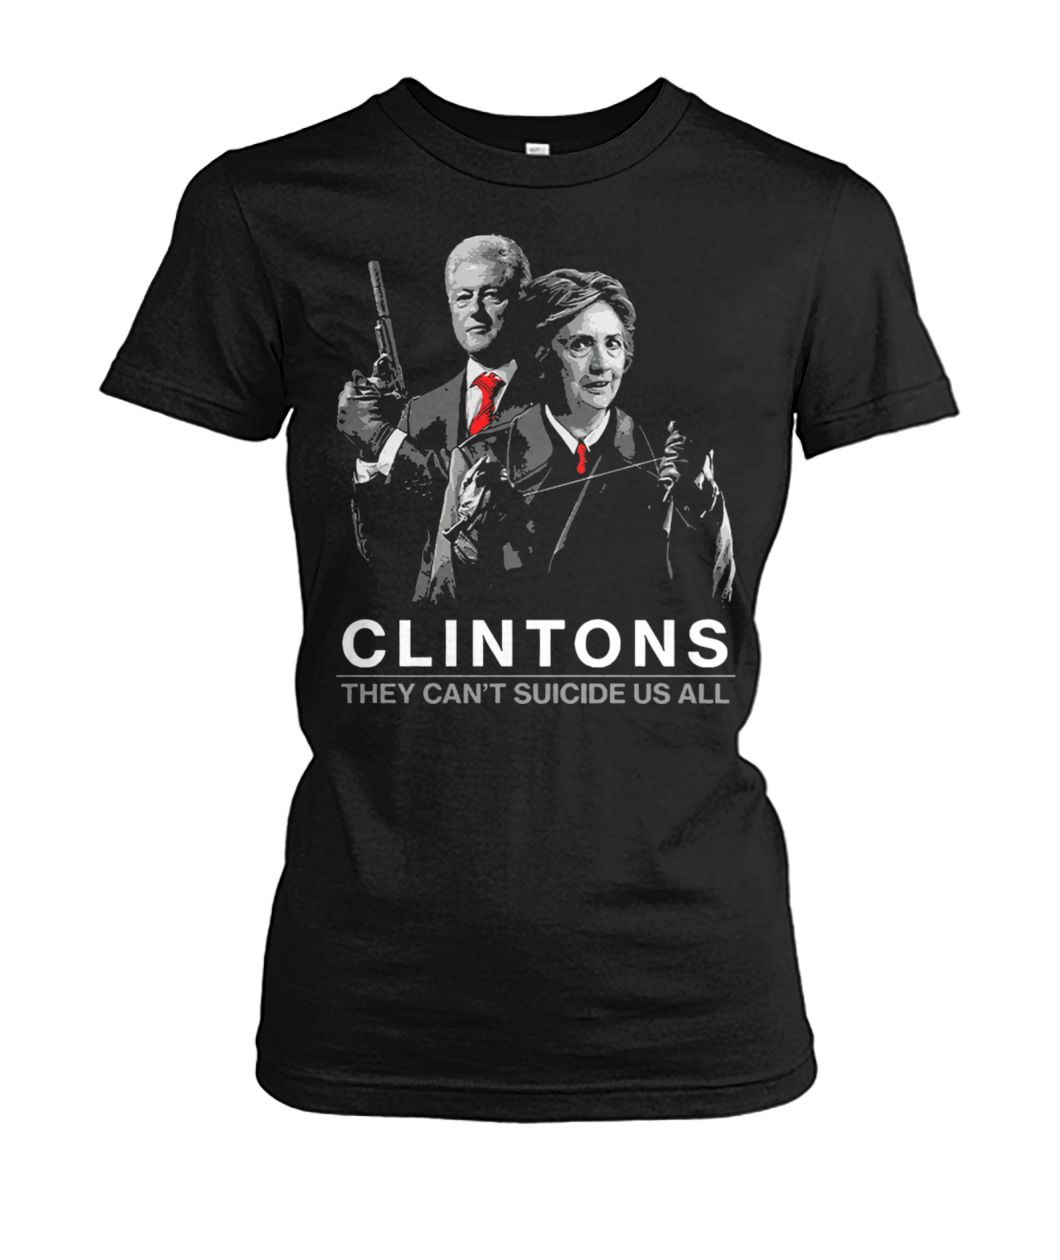 Clintons they can't suicide us all women's crew tee